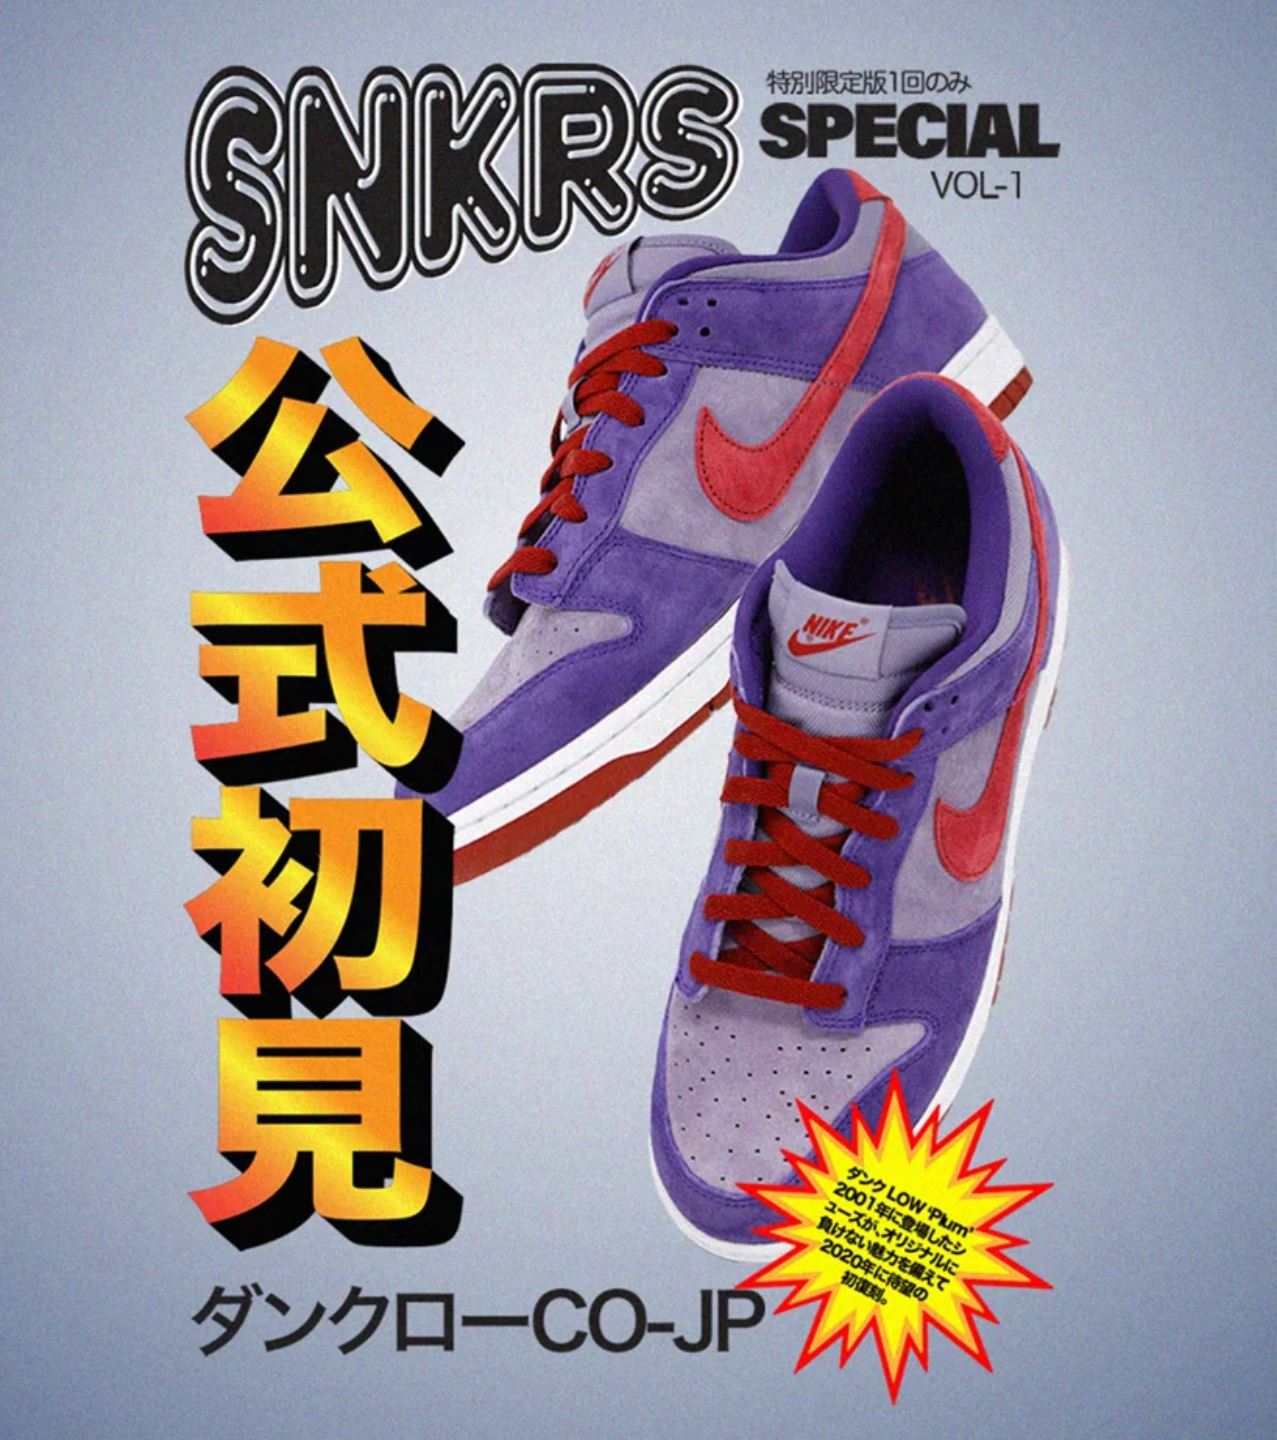 Nike Dunk Low “Plum” 2001’s Ugly Duckling Pack (ナイキ ダンク ロー “プラム” 2001 アグリー ダックリング パック)